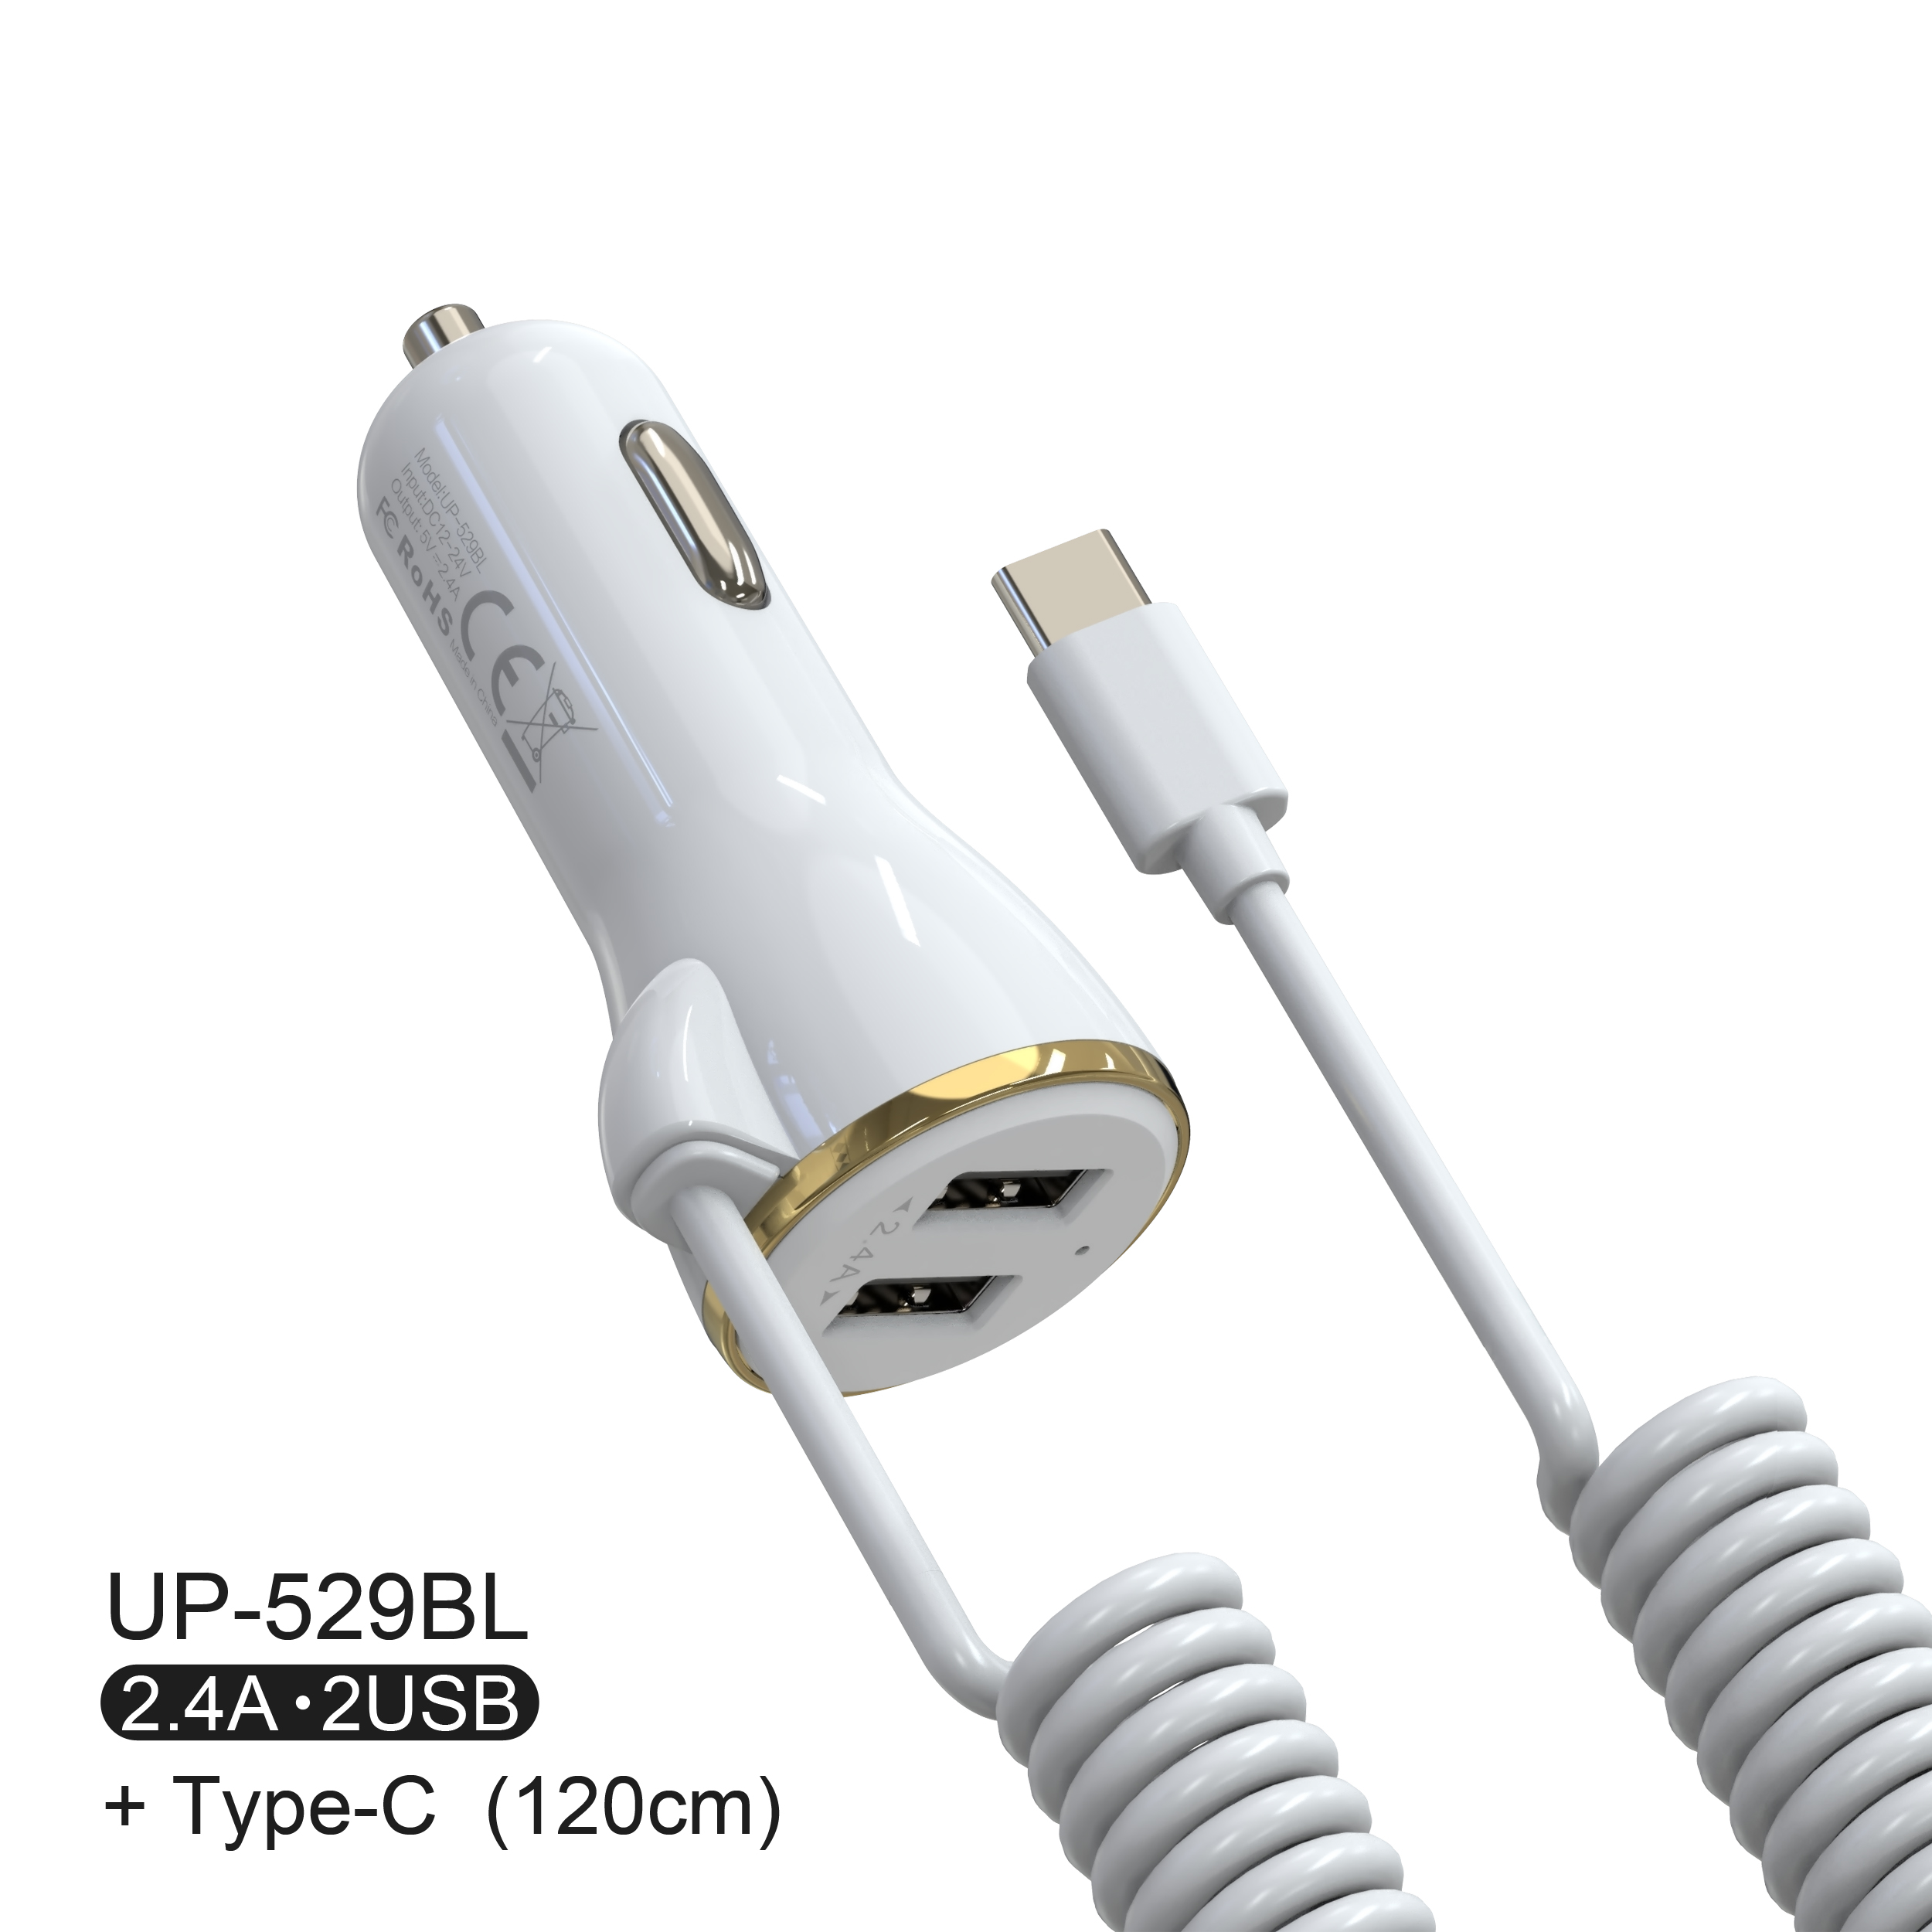 Dual port USB car charger with telescopic Type-c cable